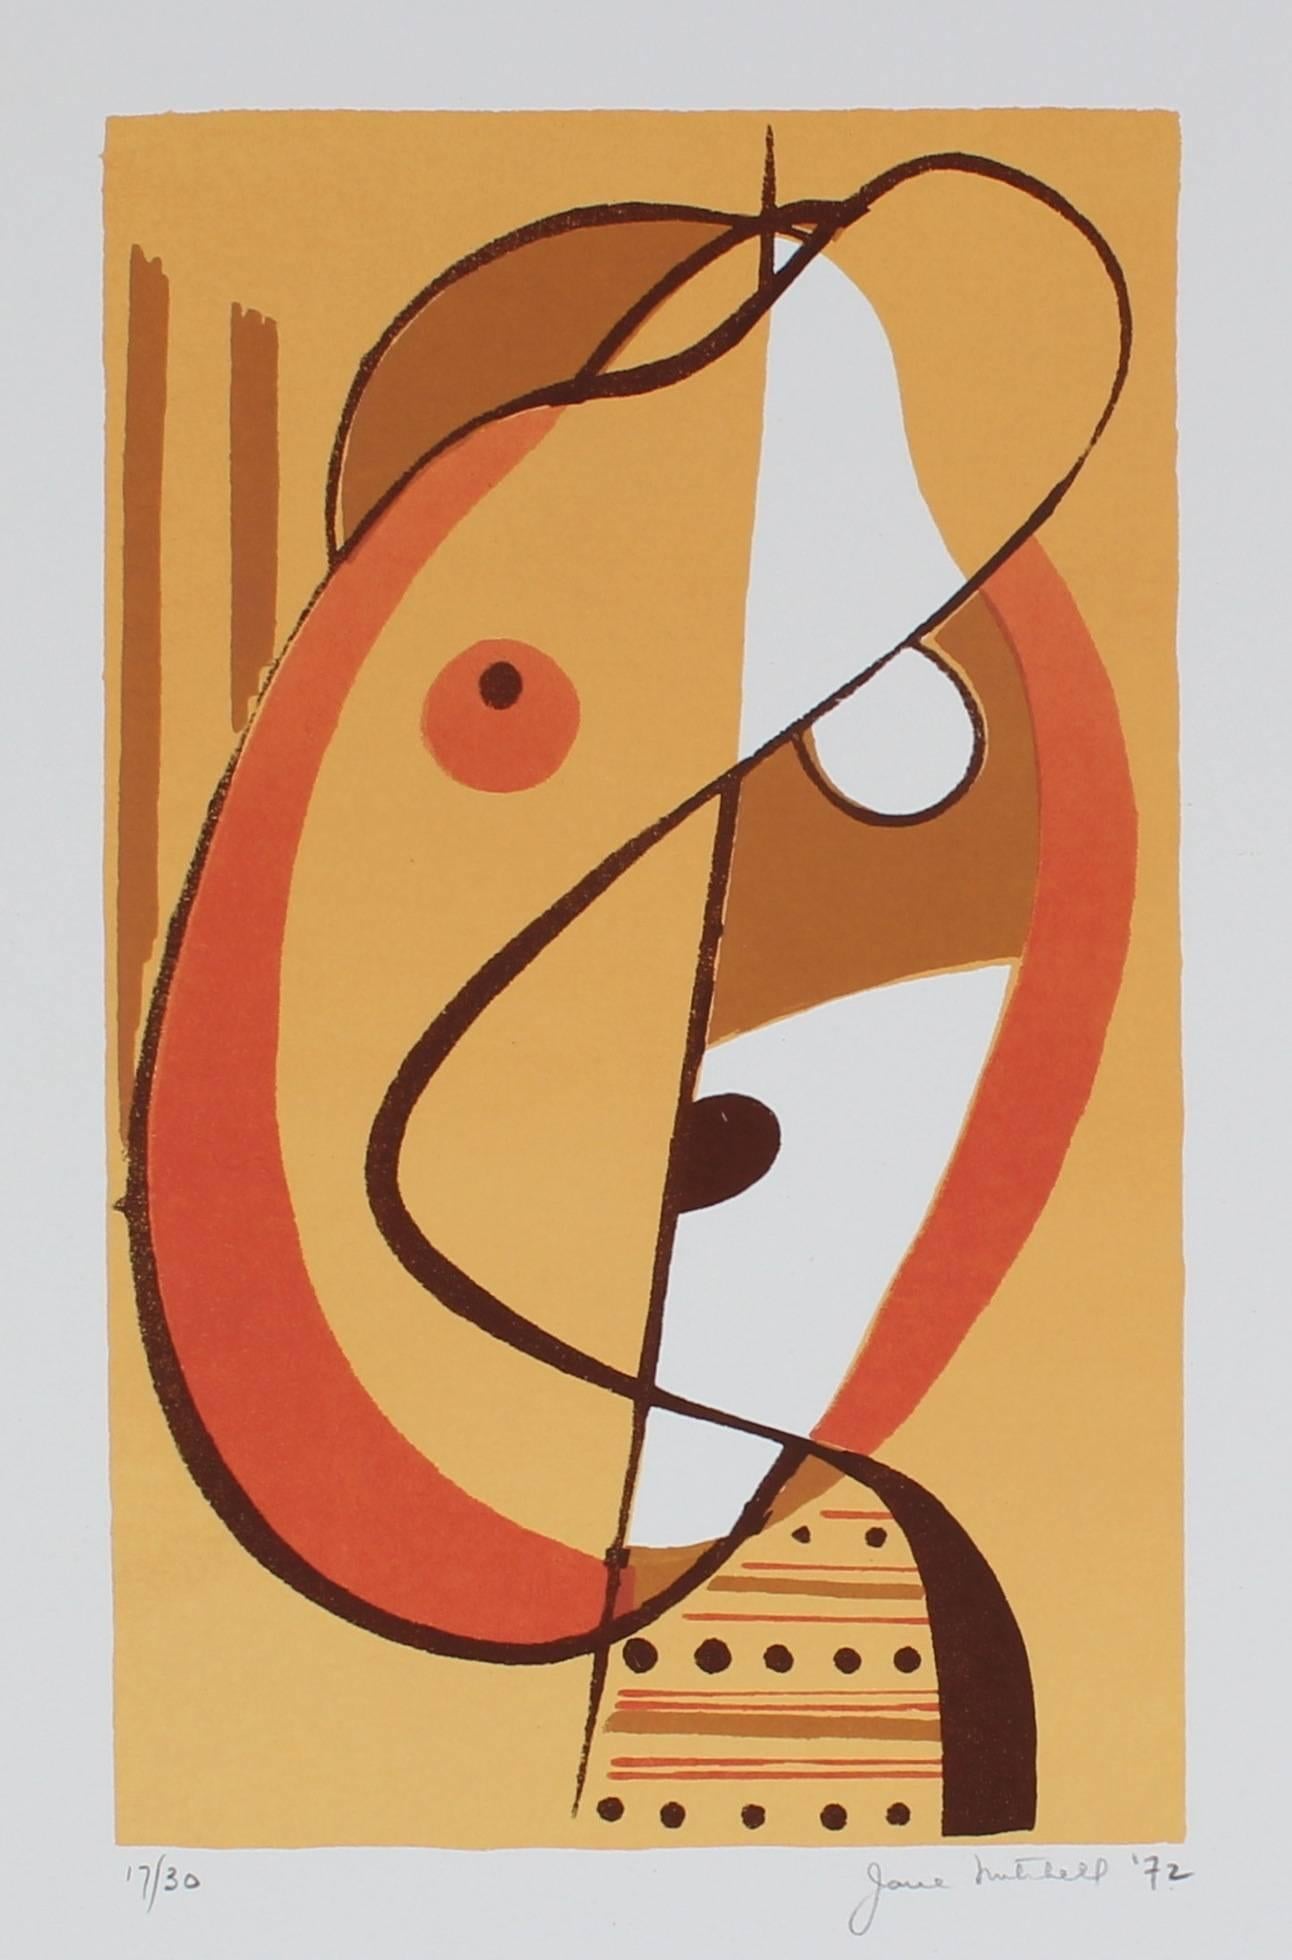 Jane Mitchell Abstract Print - "Small Head" Abstracted Serigraph Abstract, 1972